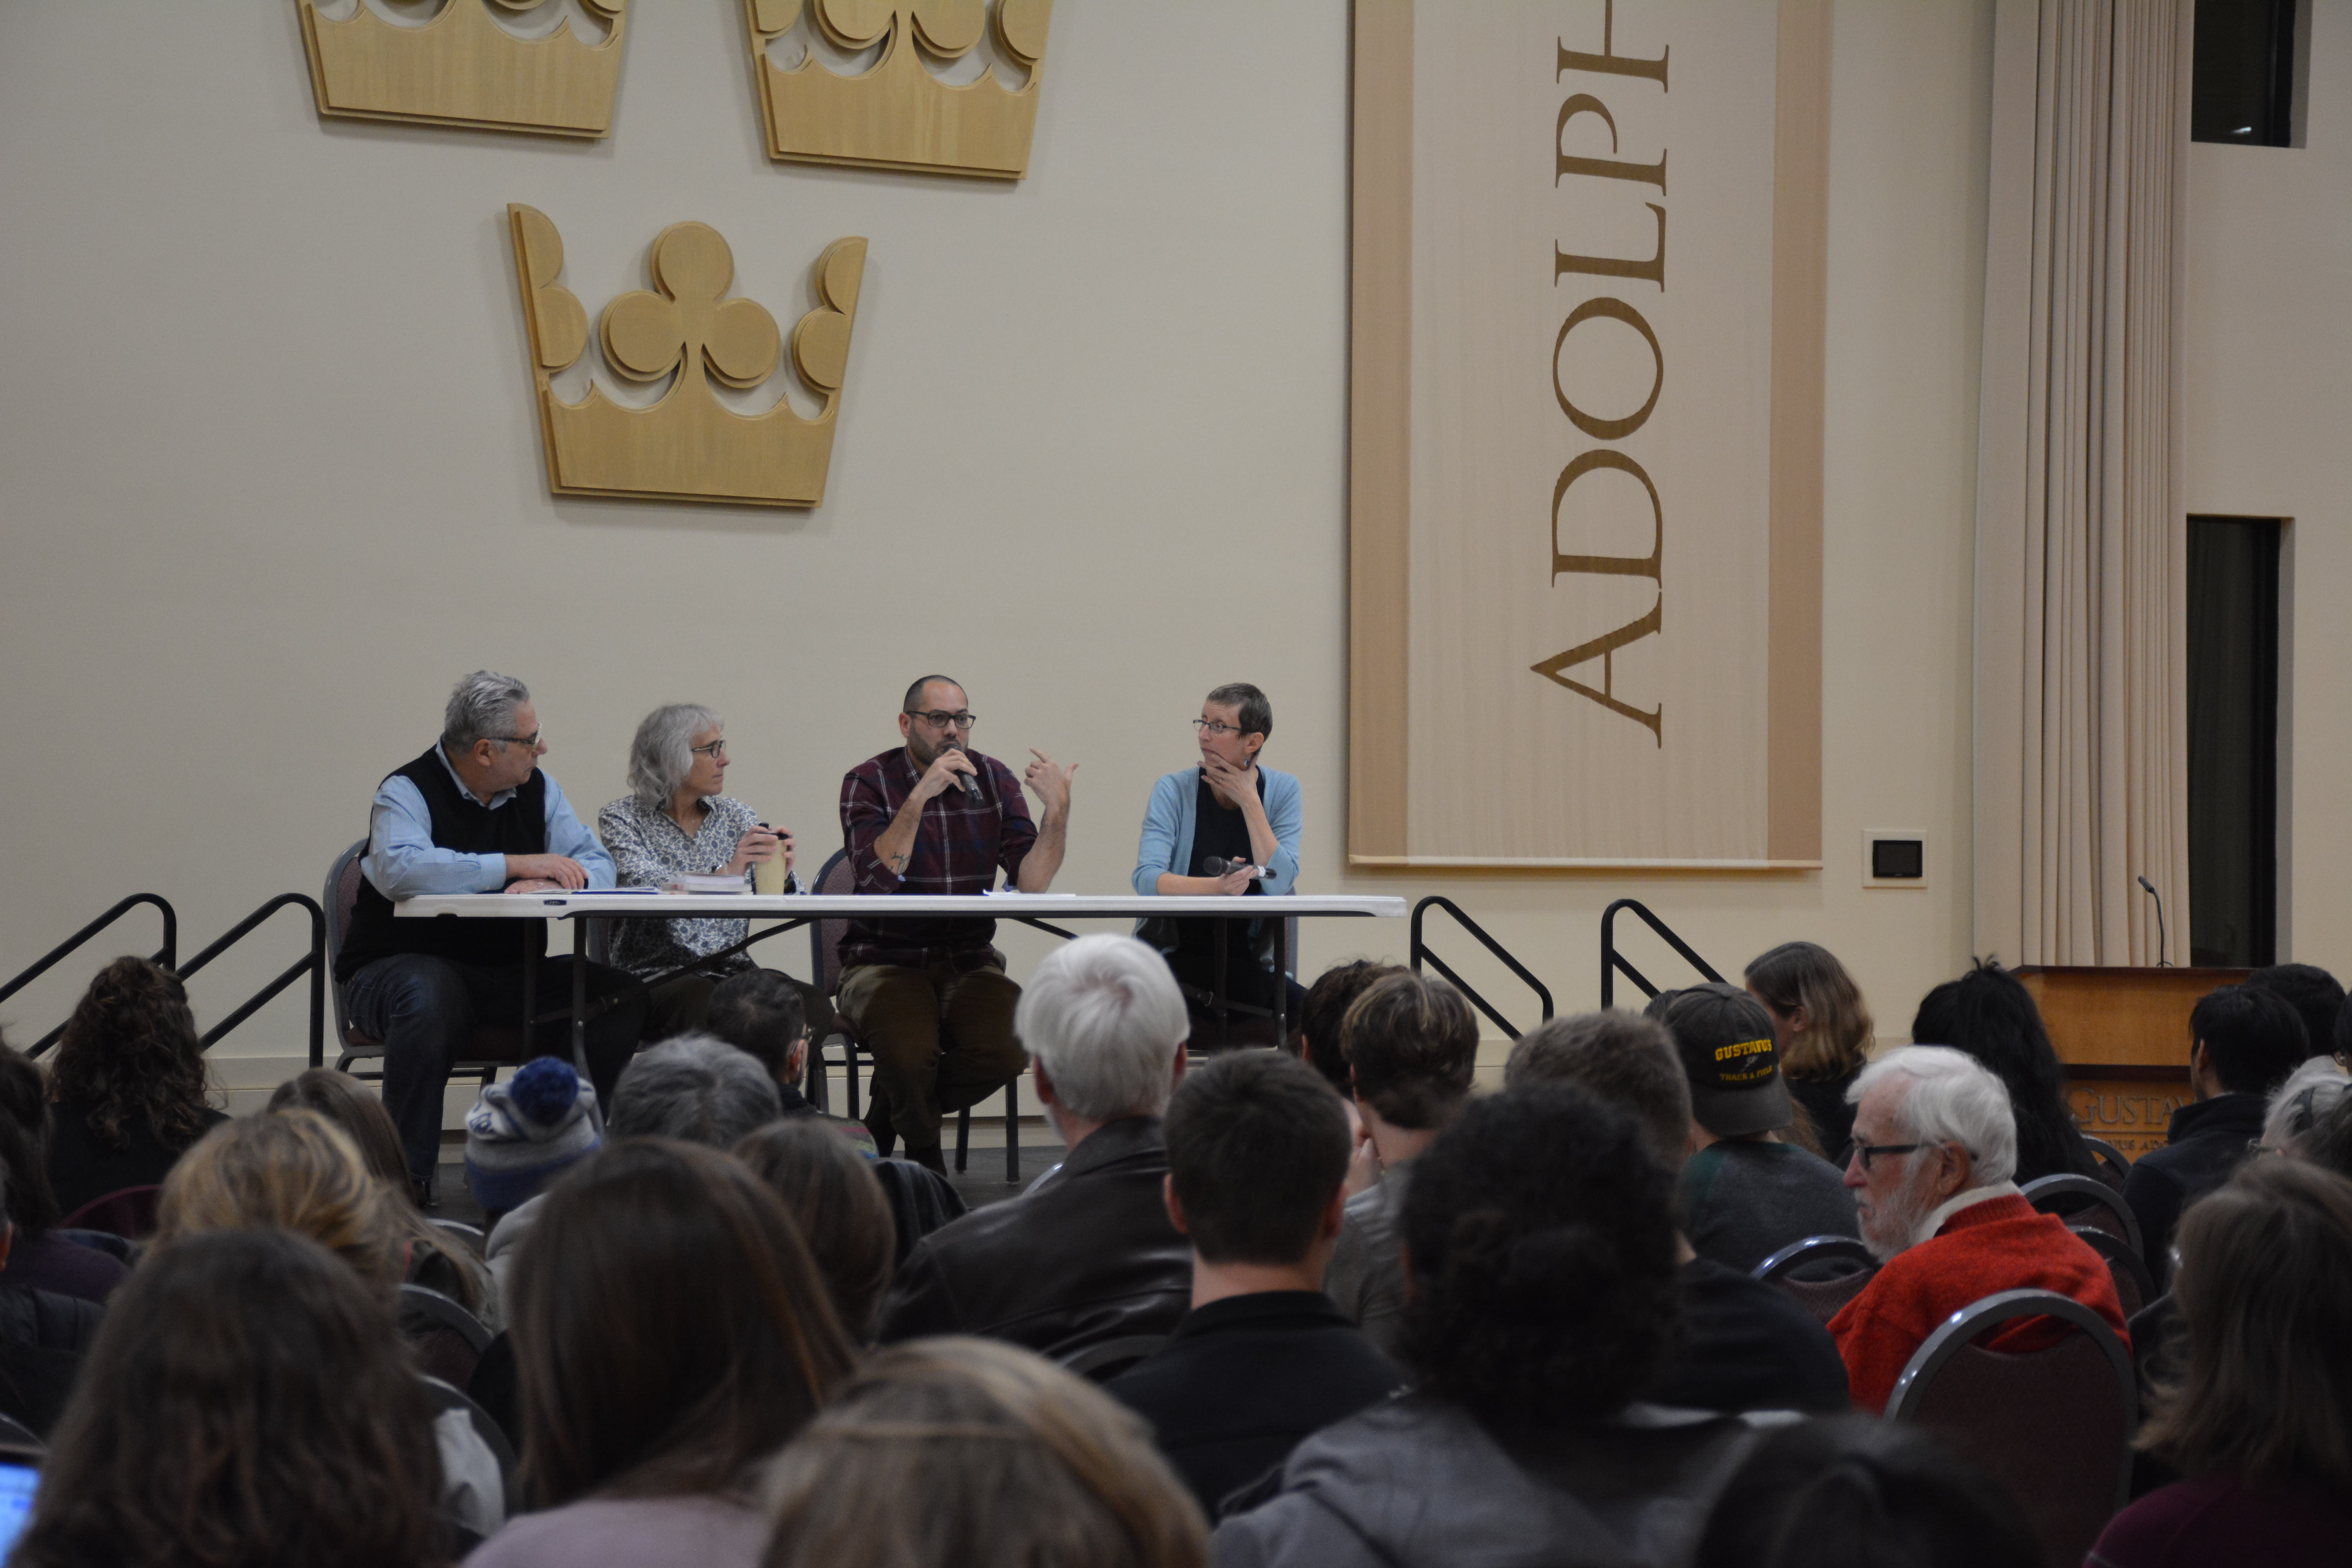 Four panelists from different departments volunteered for the event based on their interest in the topic.